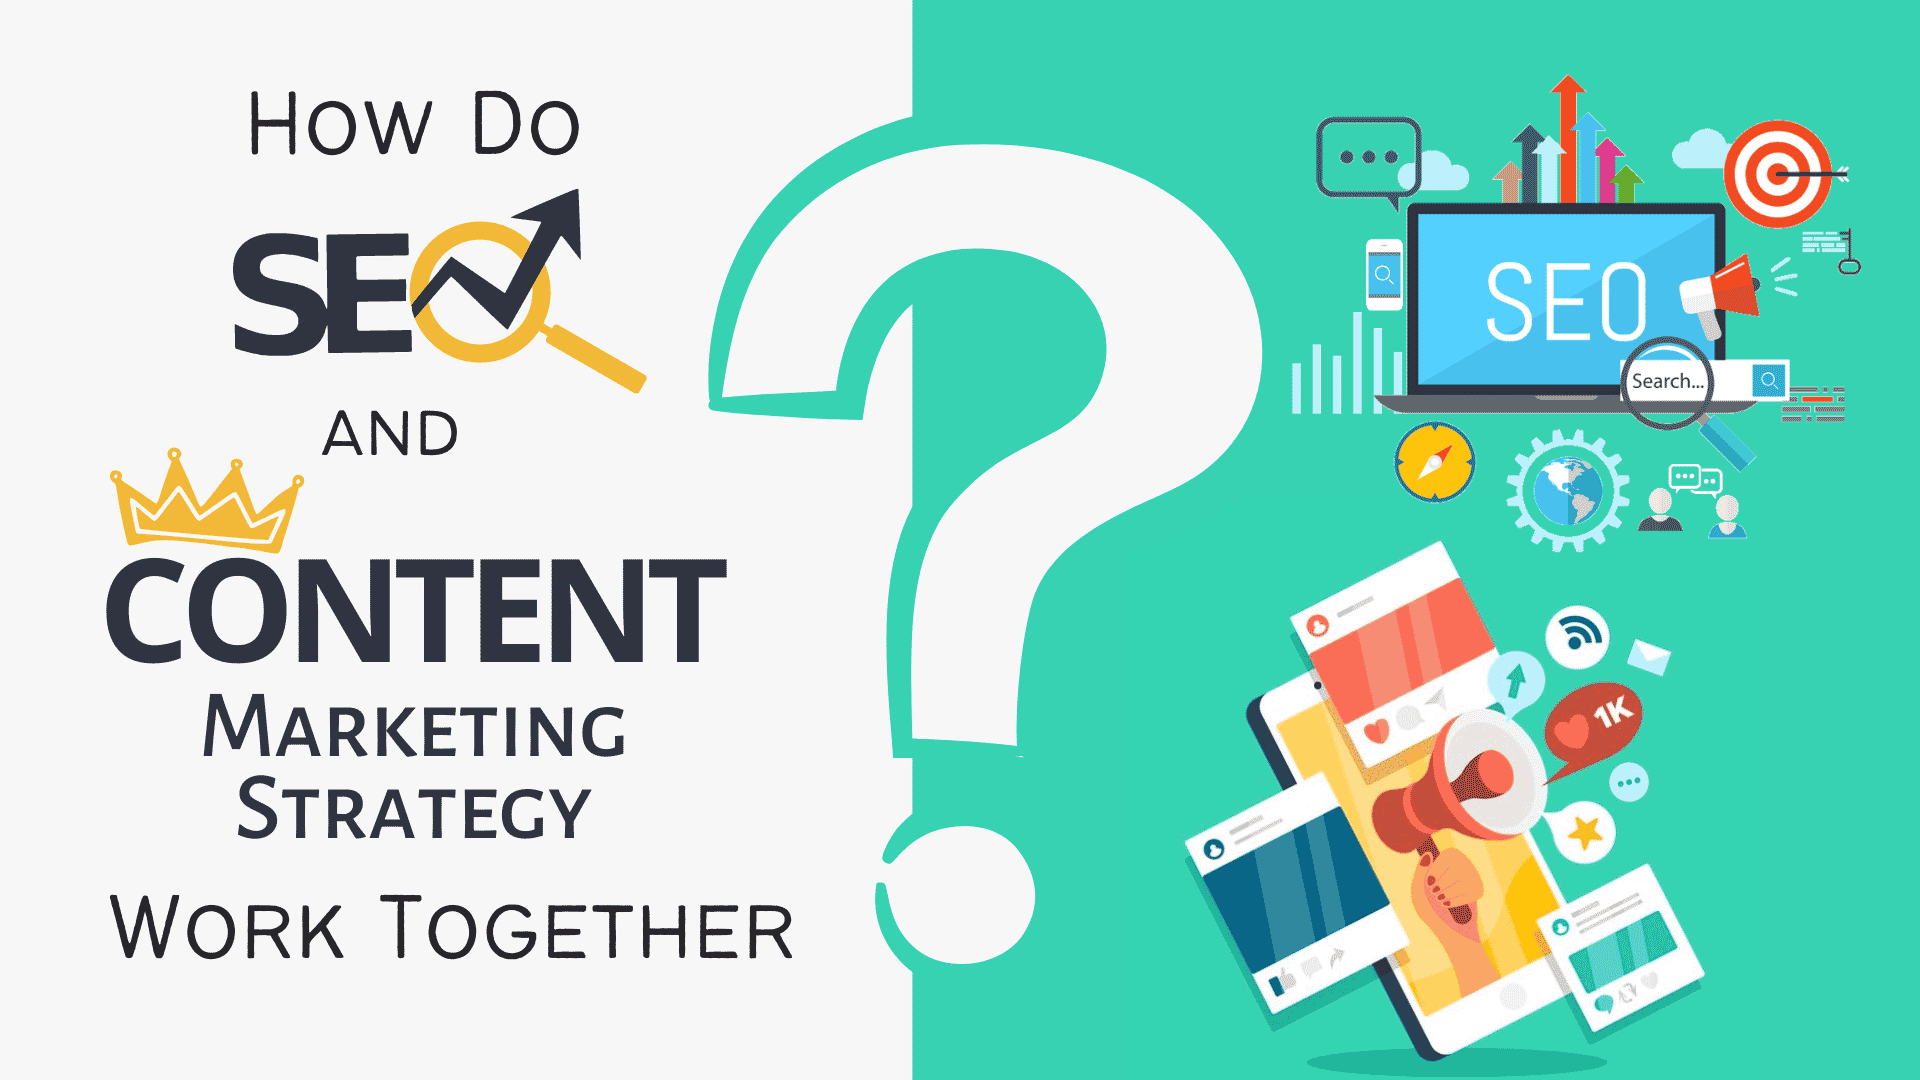 How Do SEO and Content Marketing Strategy Work Together?